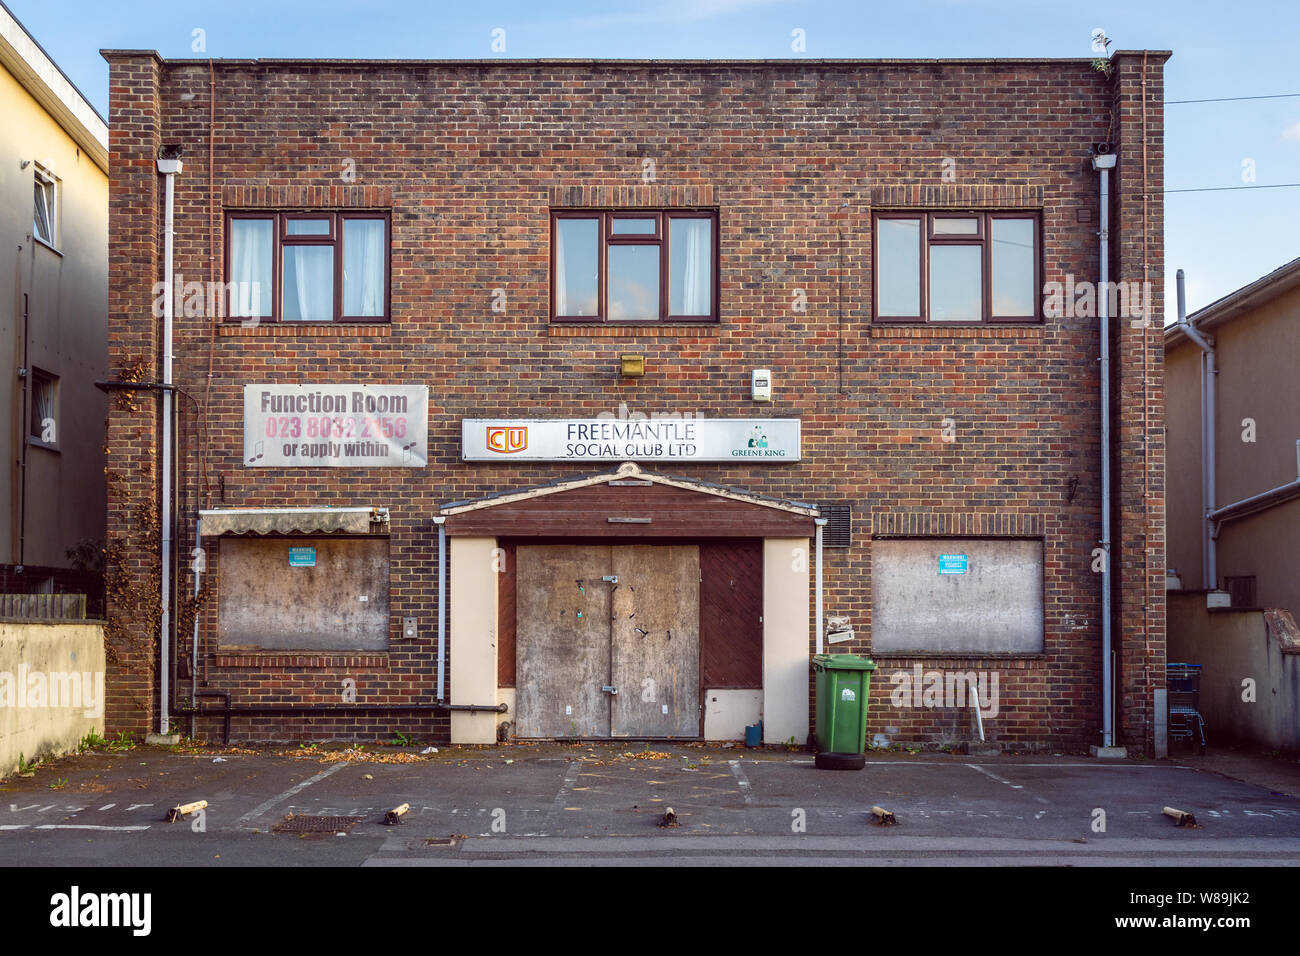 The recently closed down Freemantle Social Club along Waterloo Road in Southampton Freemantle district July 2019, Southampton, Hampshire, England, UK Stock Photo